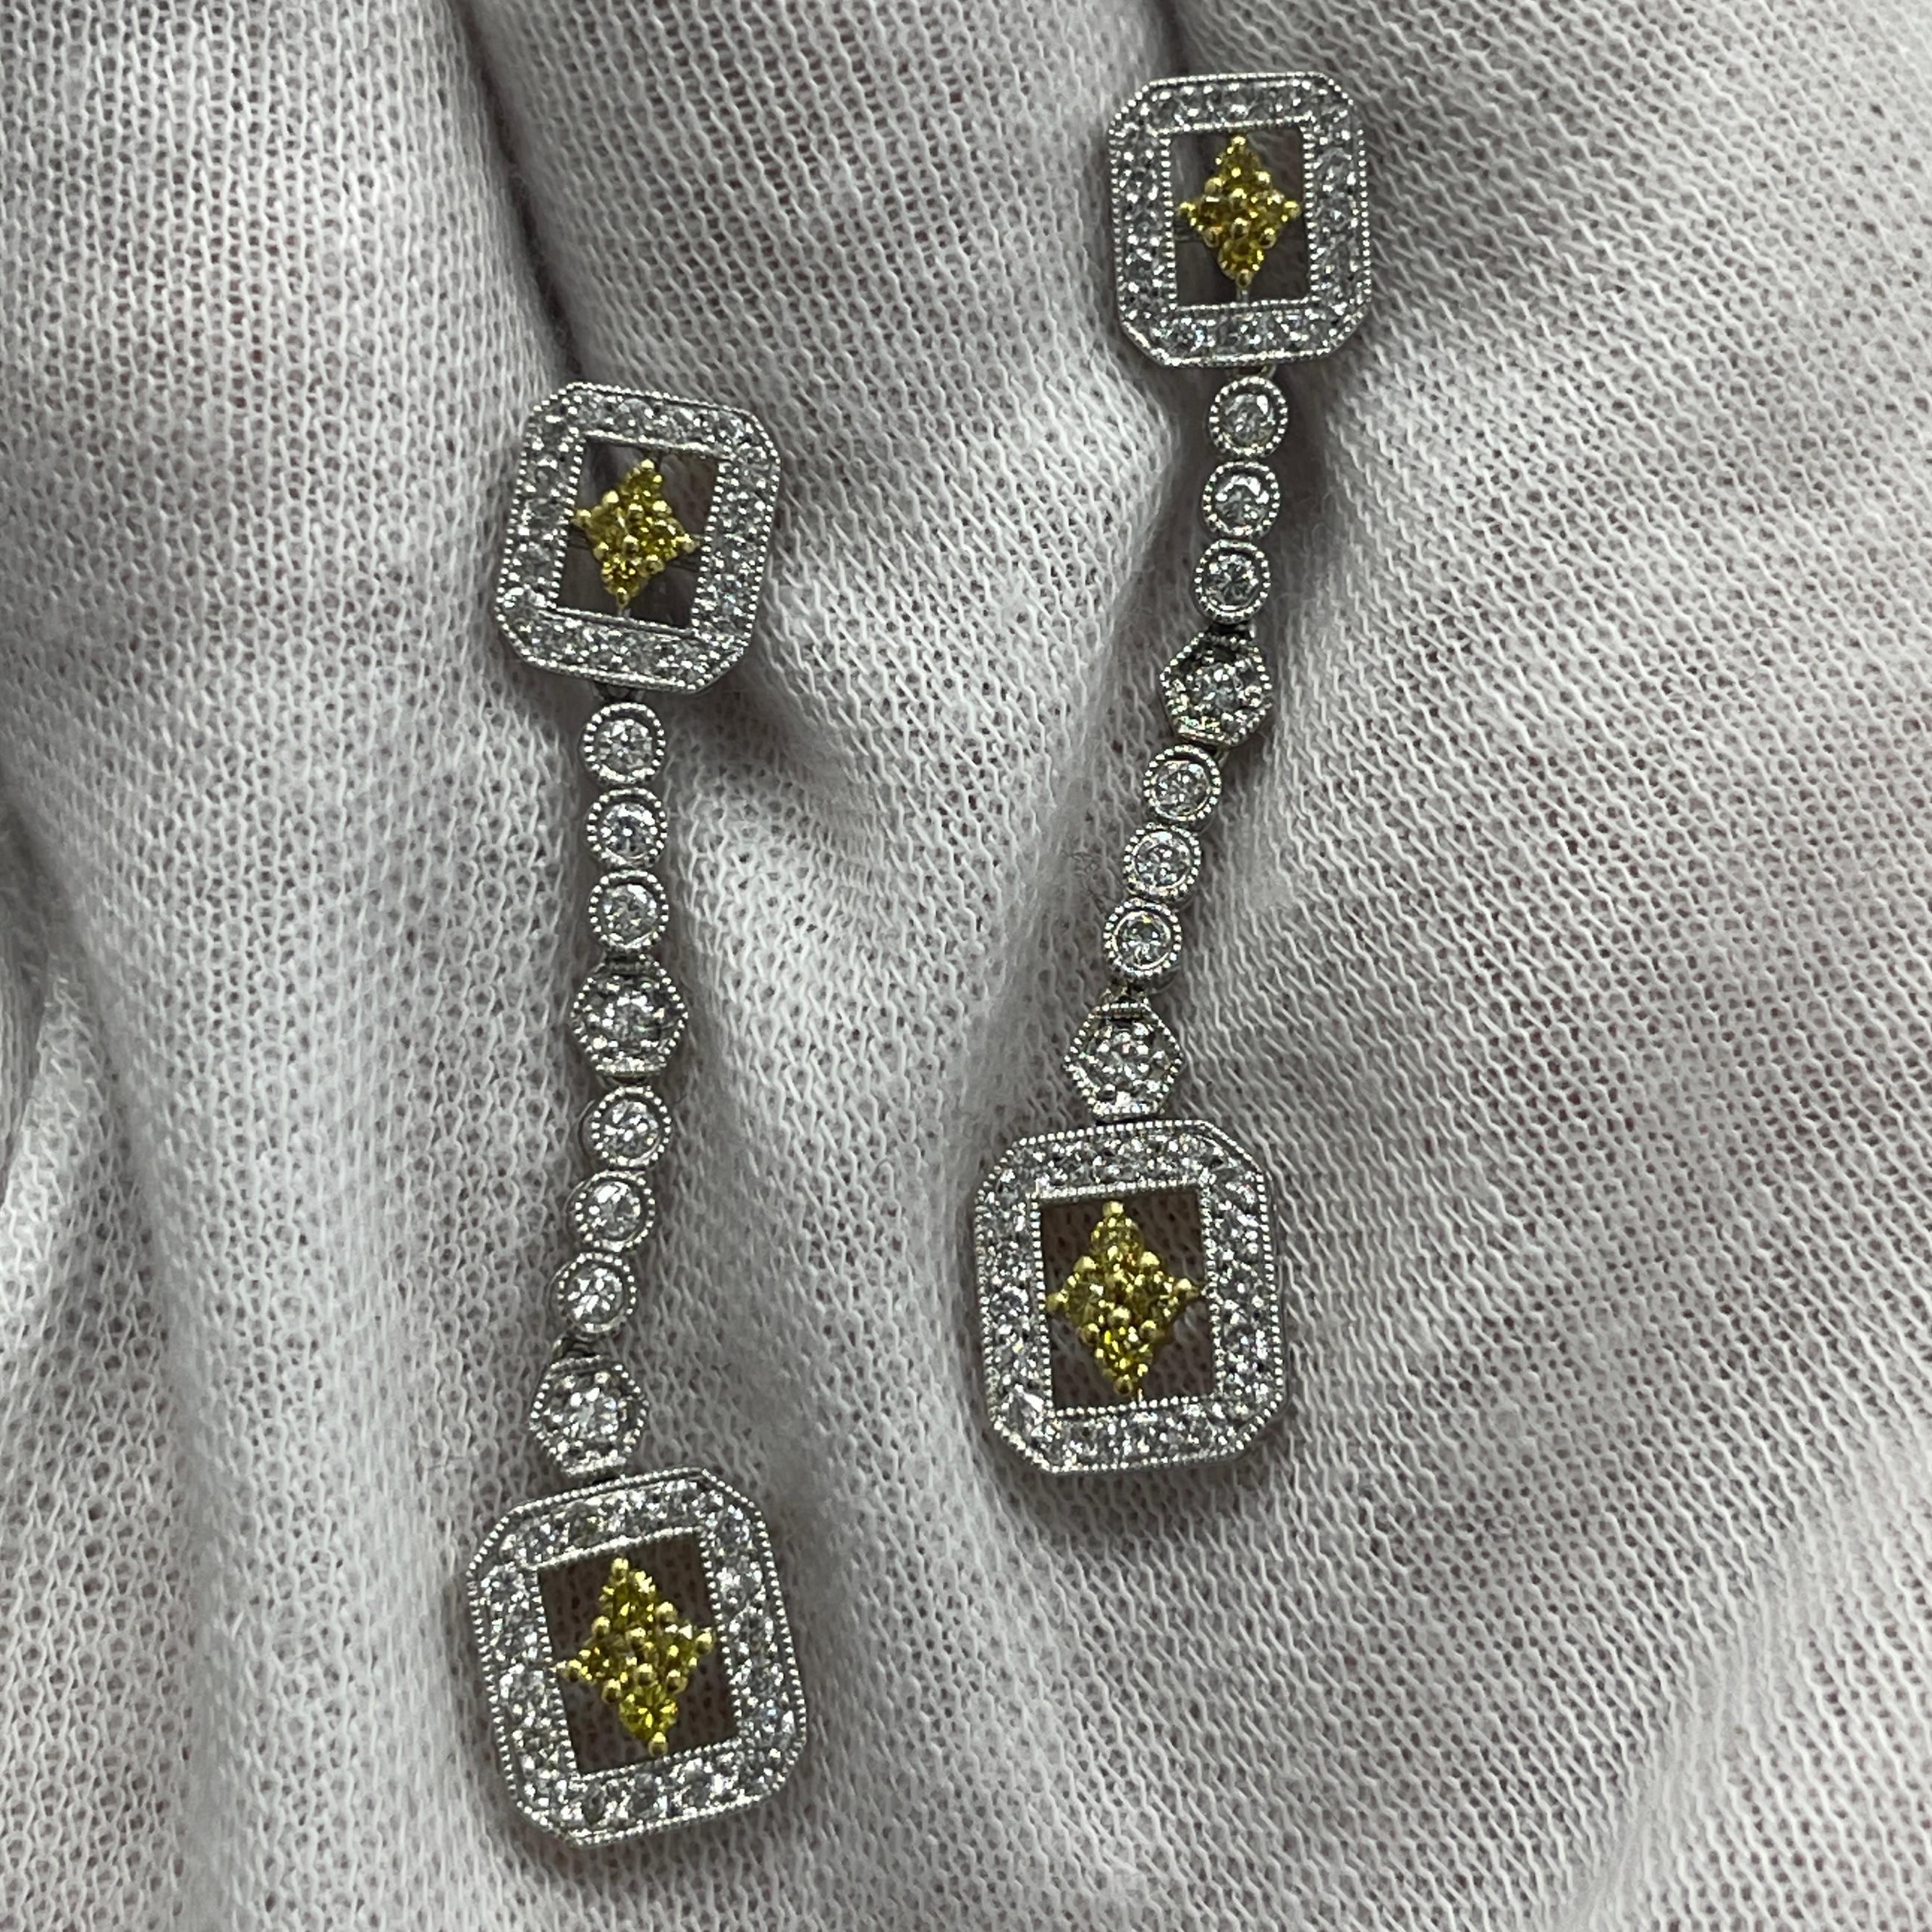 These elegant 18K white and yellow gold dangling earrings carry 0.22Ct of white diamonds and 0.77Ct of yellow diamonds